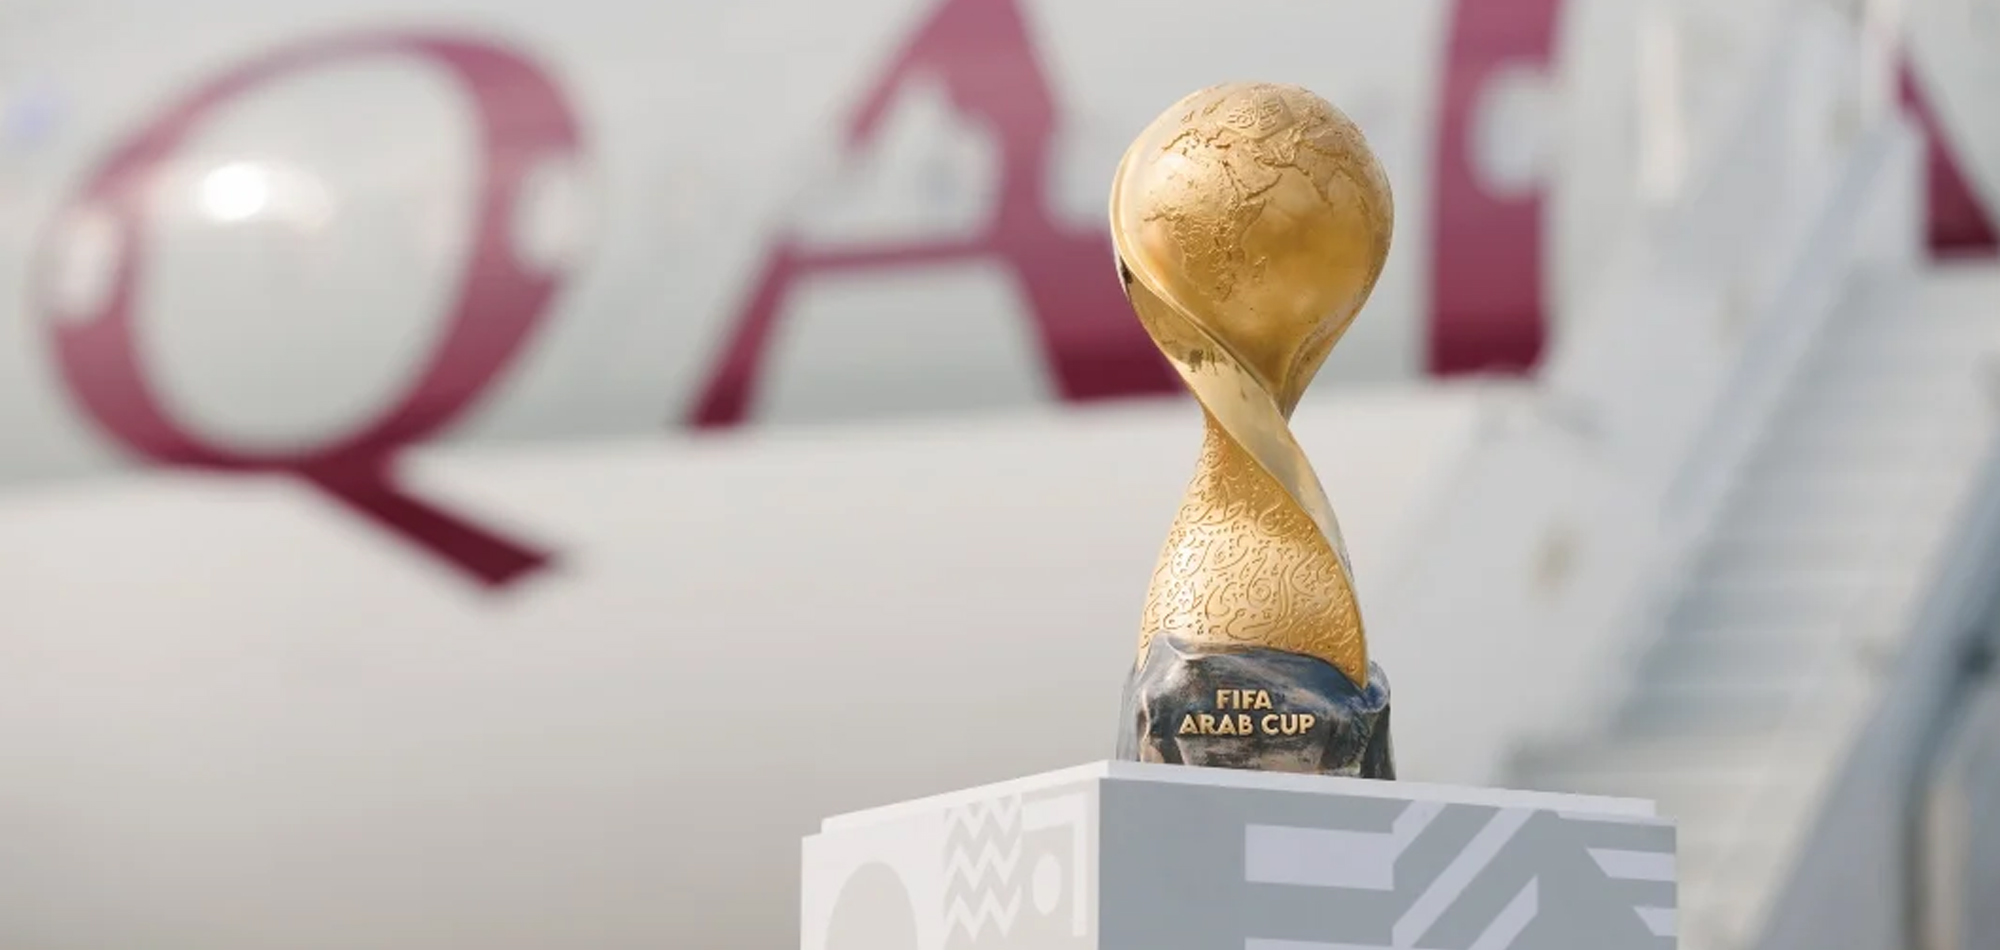 FIFA Arab Cup™ Trophy to be showcased at tourist attractions across Qatar